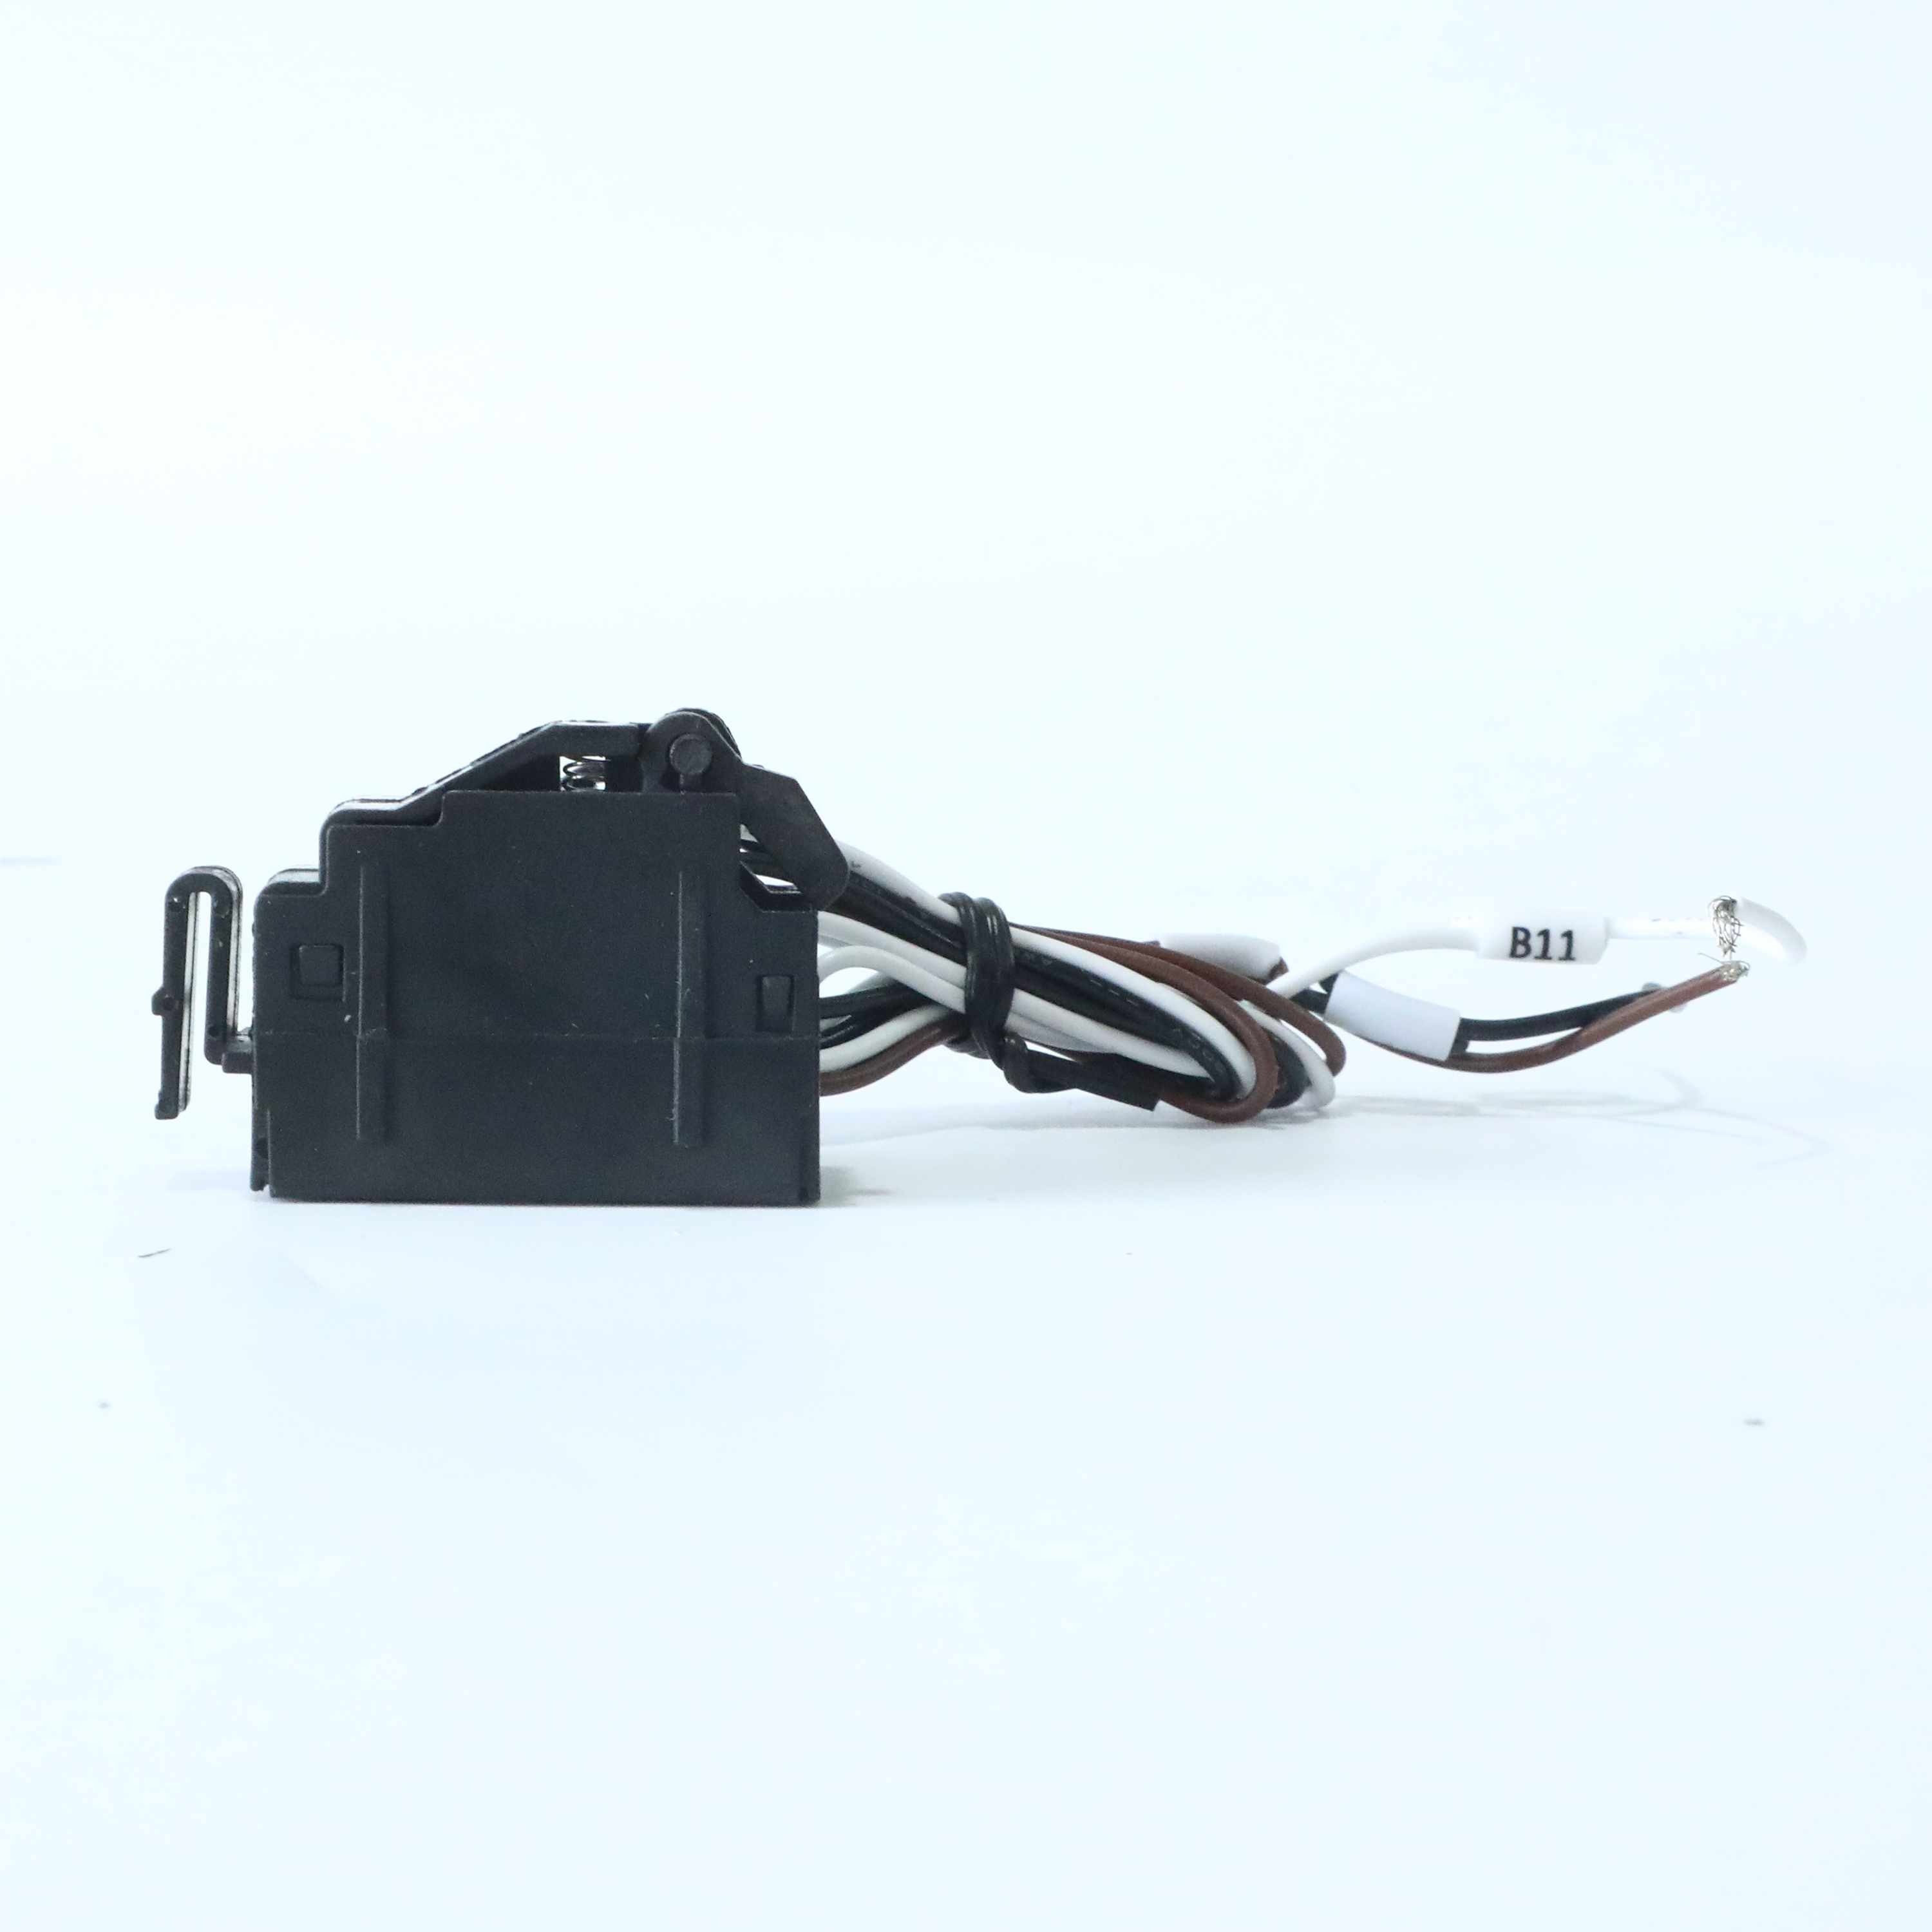 mccb accessories Aauxiliary+Alarm contact  with wiring or termial